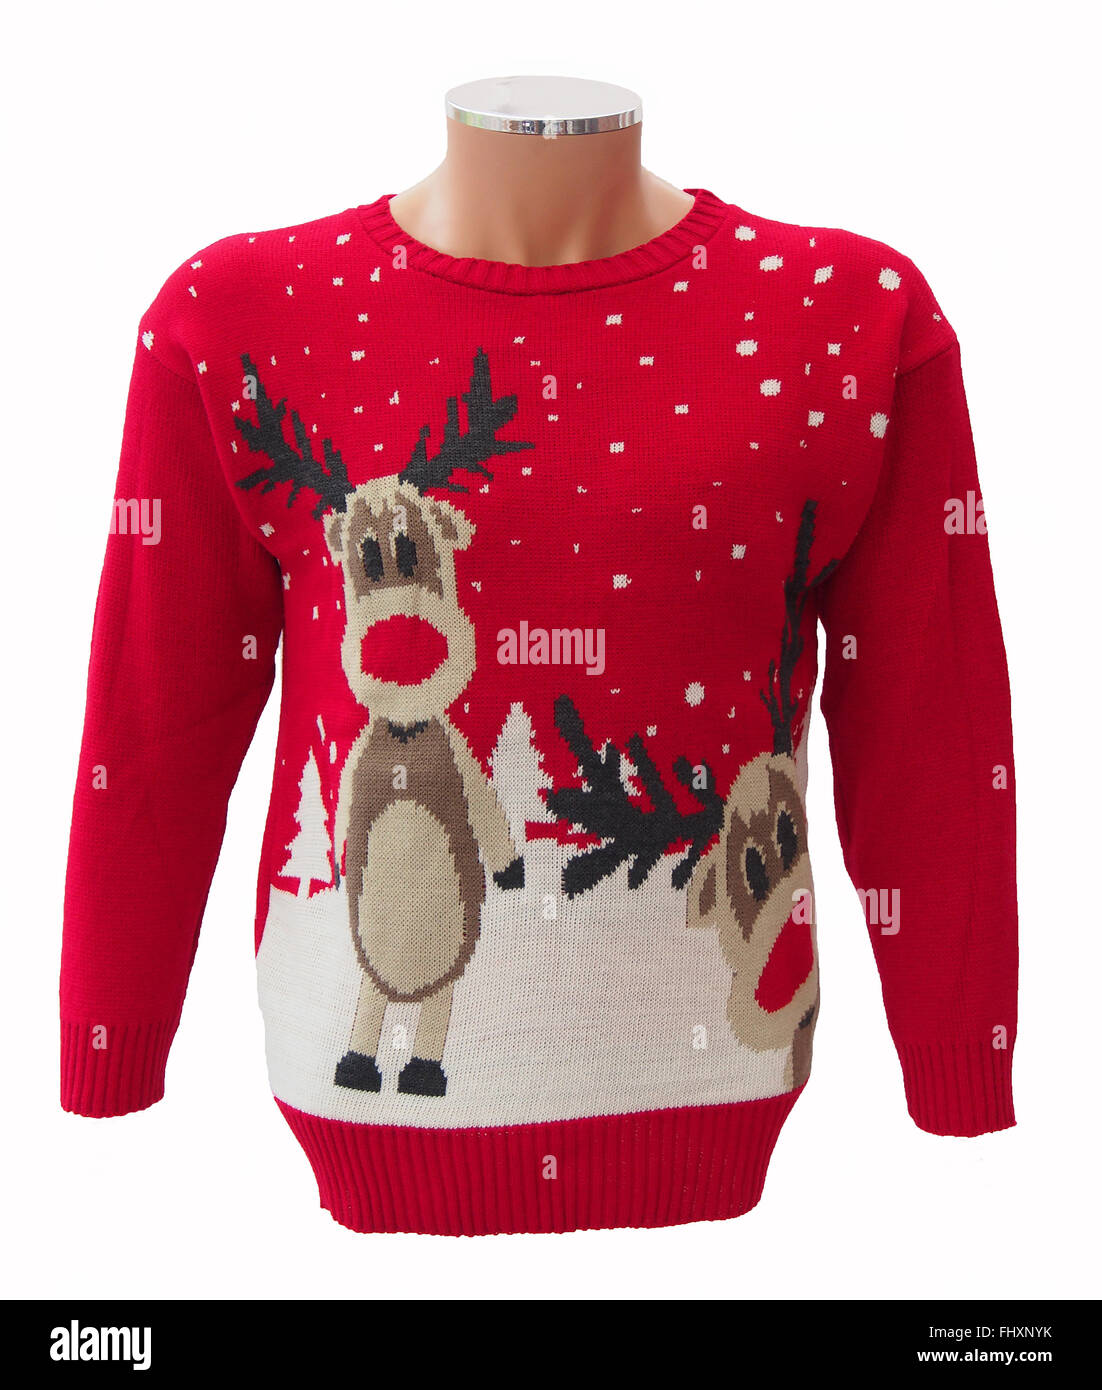 Red knitted adults' Christmas jumper, featuring Rudolph the red nosed reindeer and snowflakes, isolated on a white background. Stock Photo